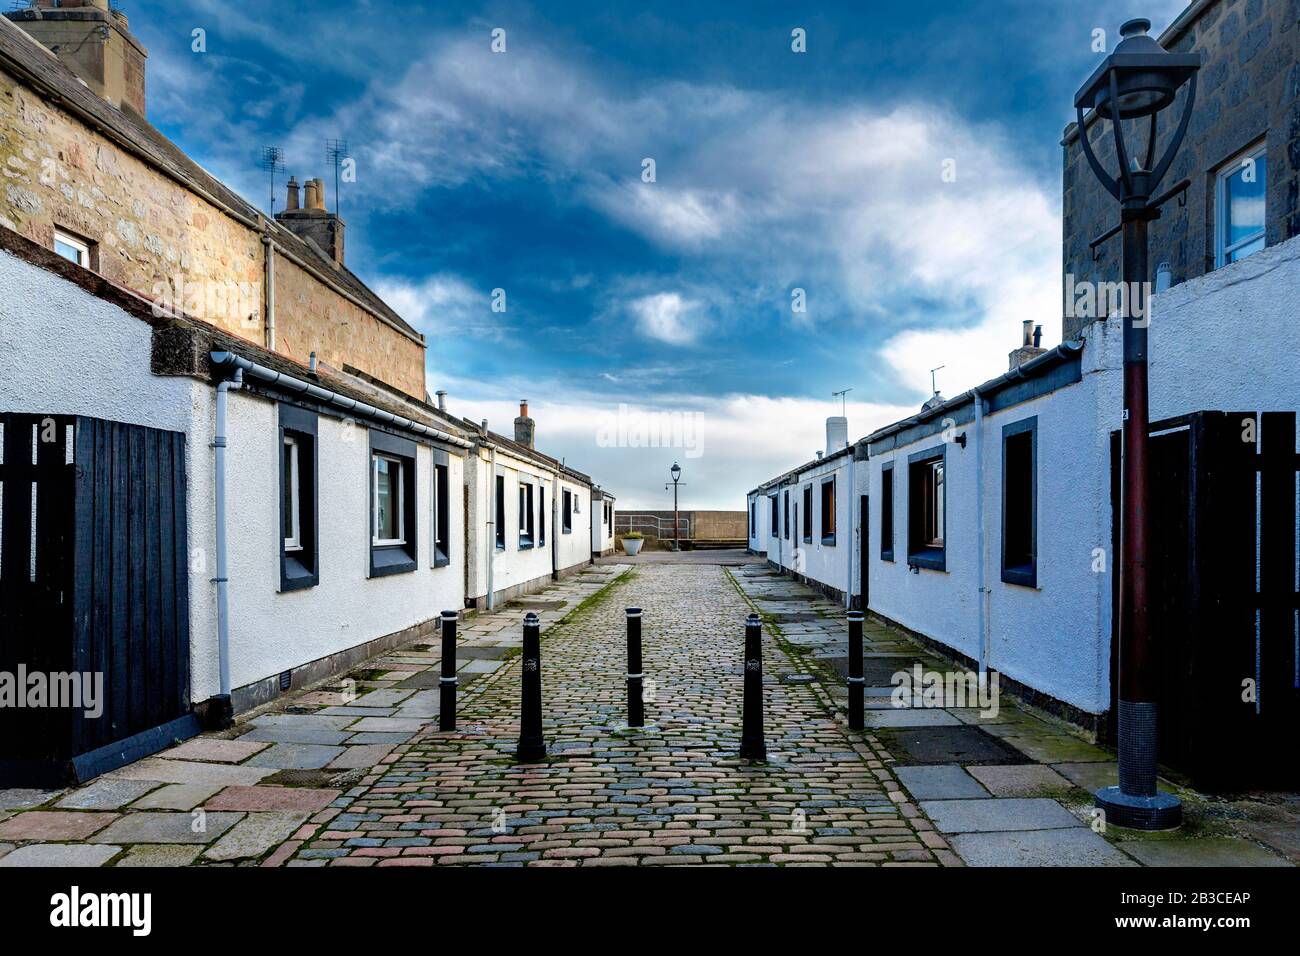 Morning walk around Footdee and Footdee Mission, an old fishing village at the east end of the Aberdeen harbour, Scotland. Fotos of empty streets. Stock Photo